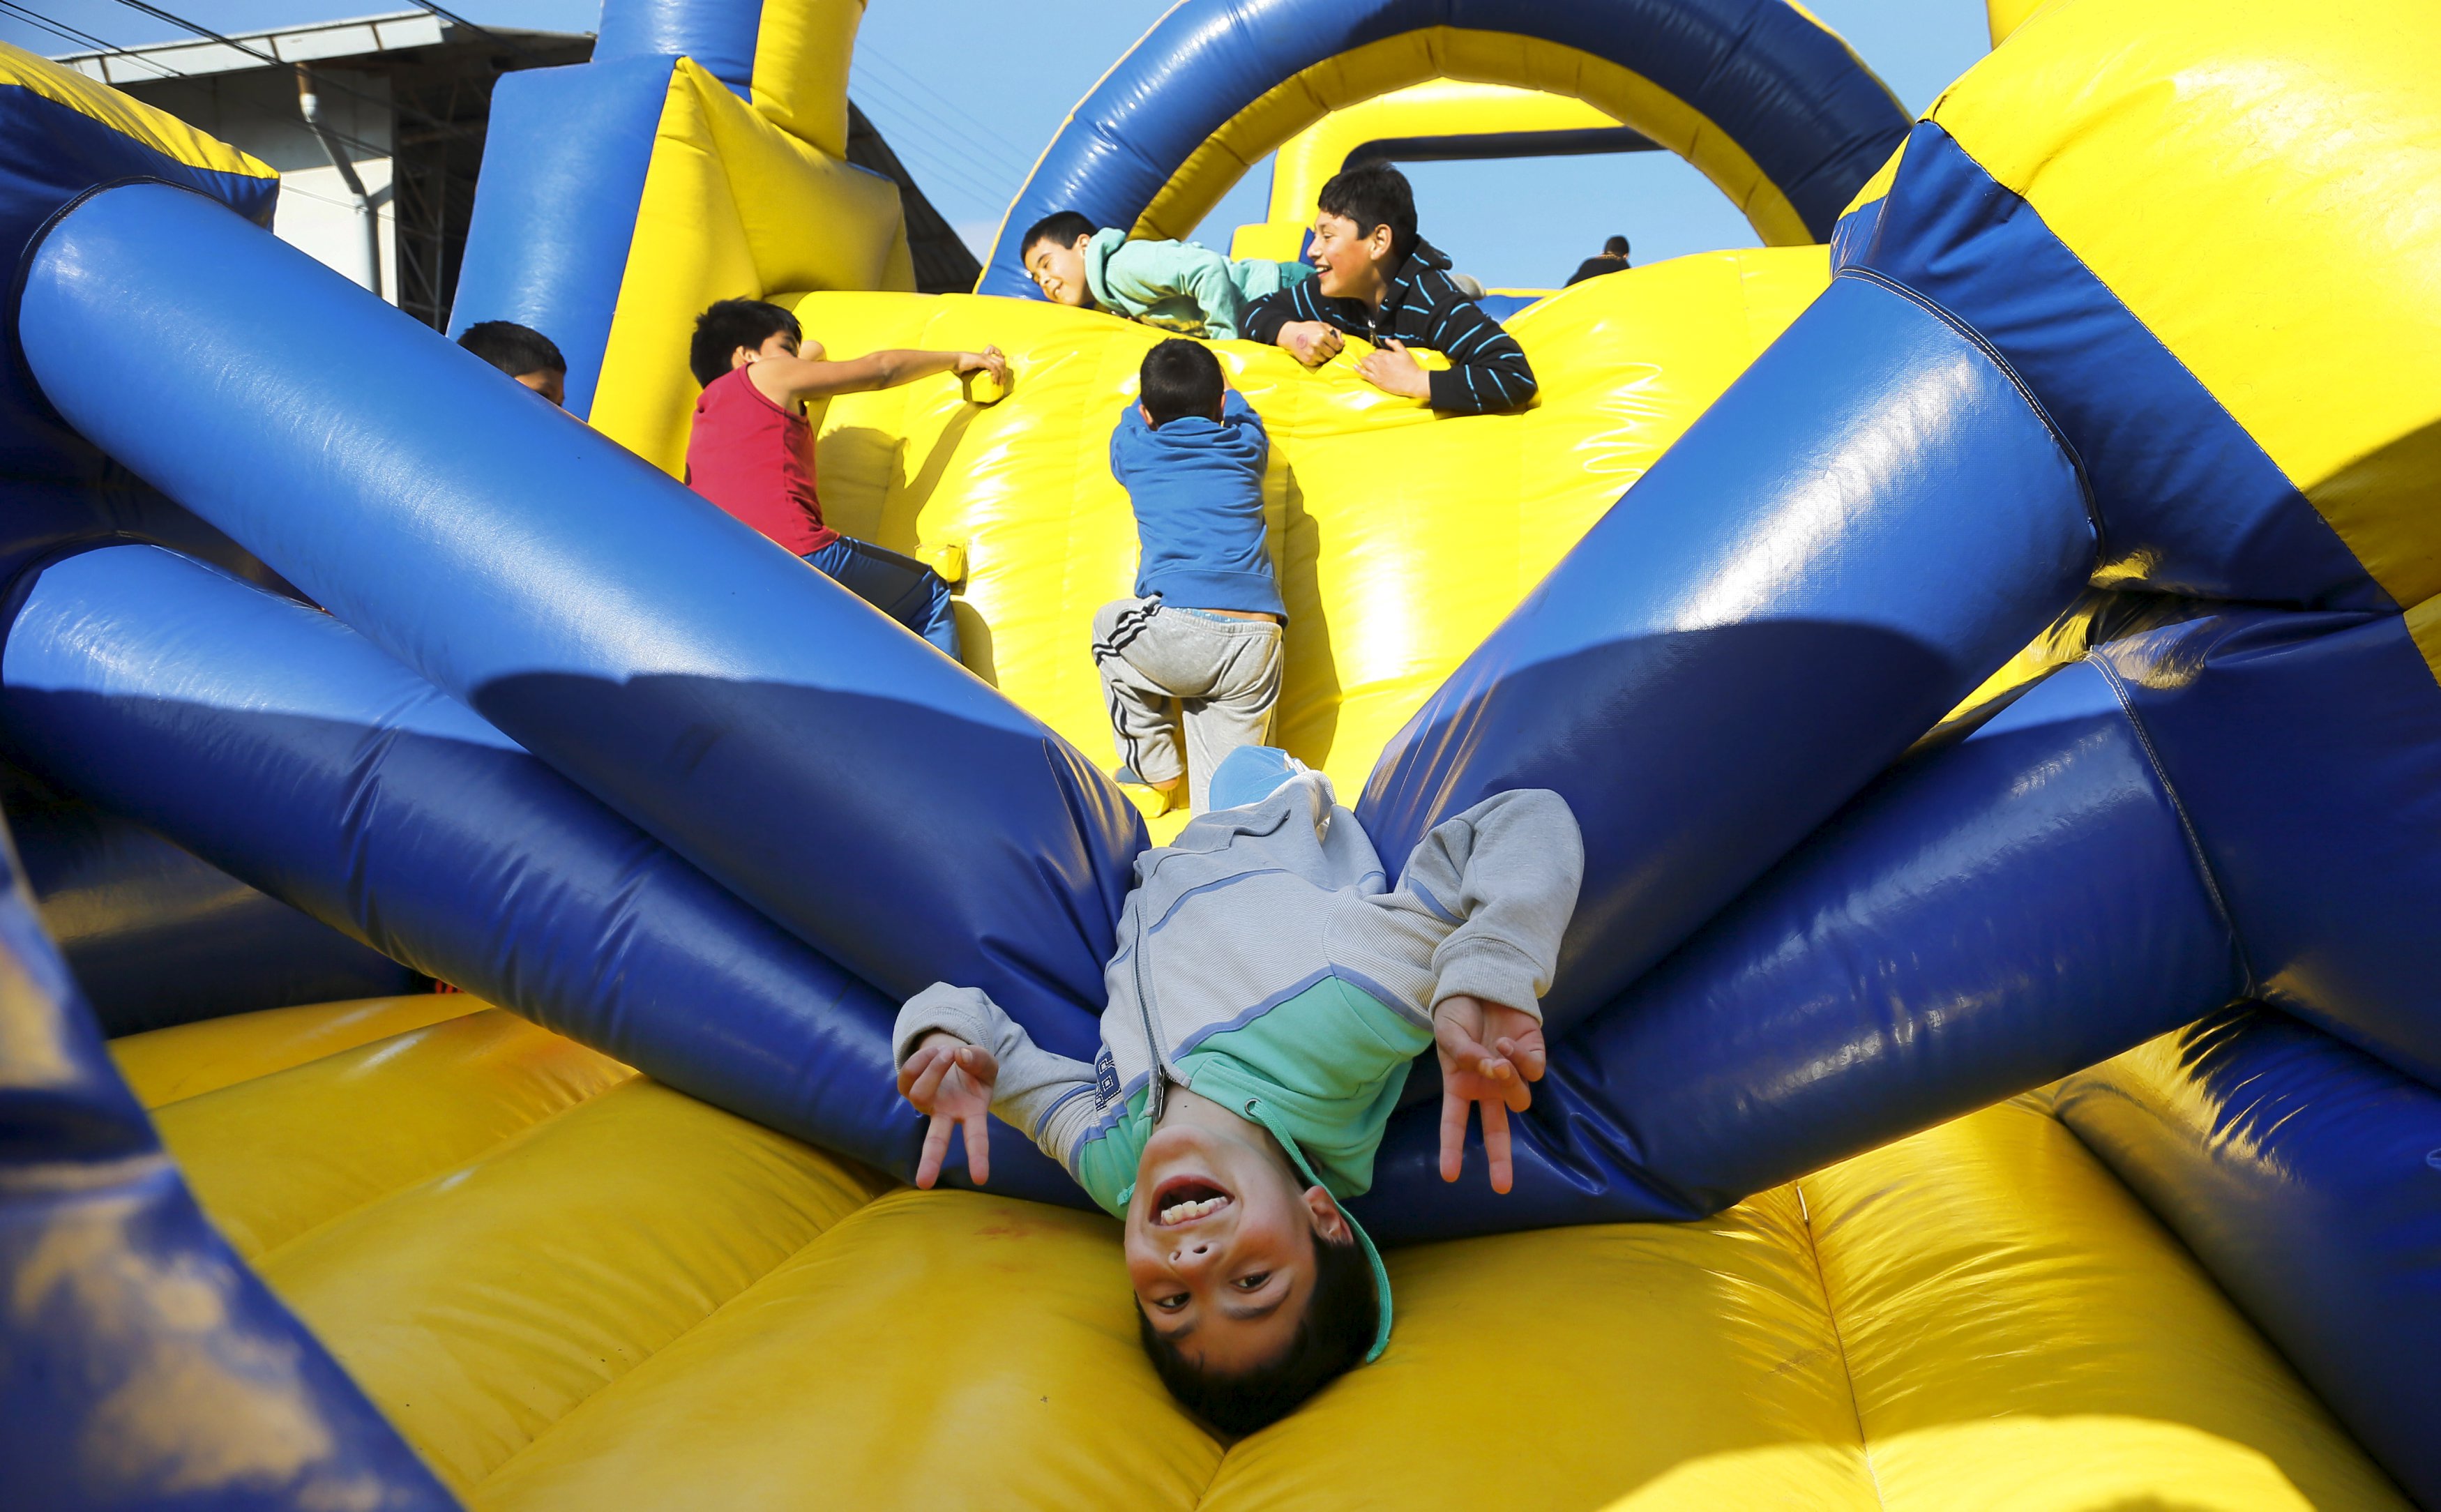 Children play at a public square in Valparaiso, Chile. Photo: Reuters